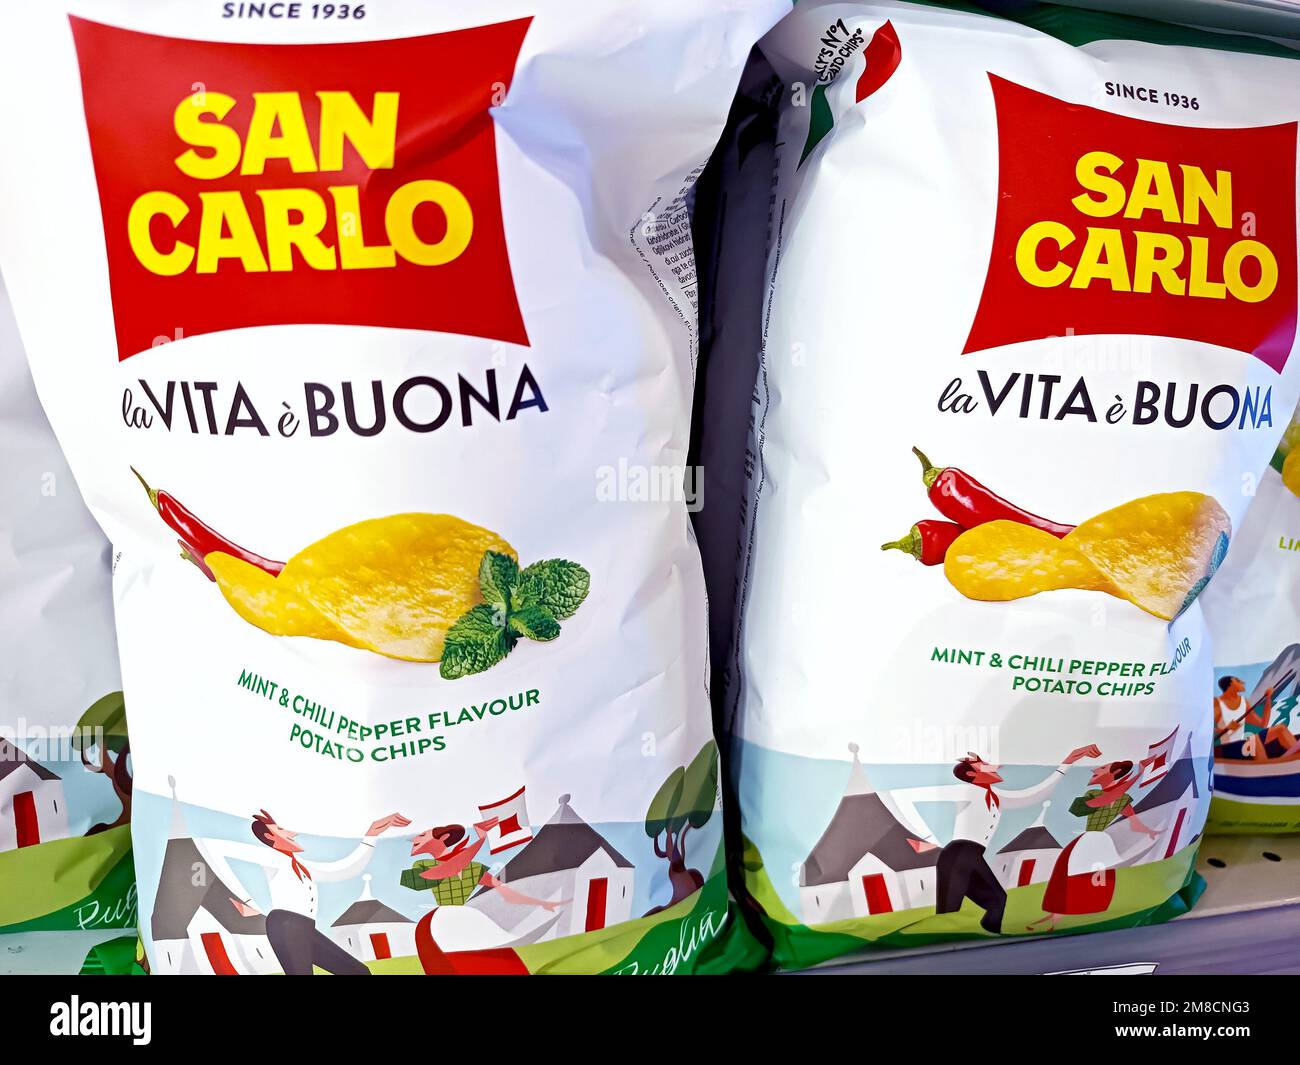 DUSHANBE, TAJIKISTAN - AUGUST 12, 2022:  Italian San Carlo potato chips with mint and chili pepper package on the display shelf in the grocery store c Stock Photo